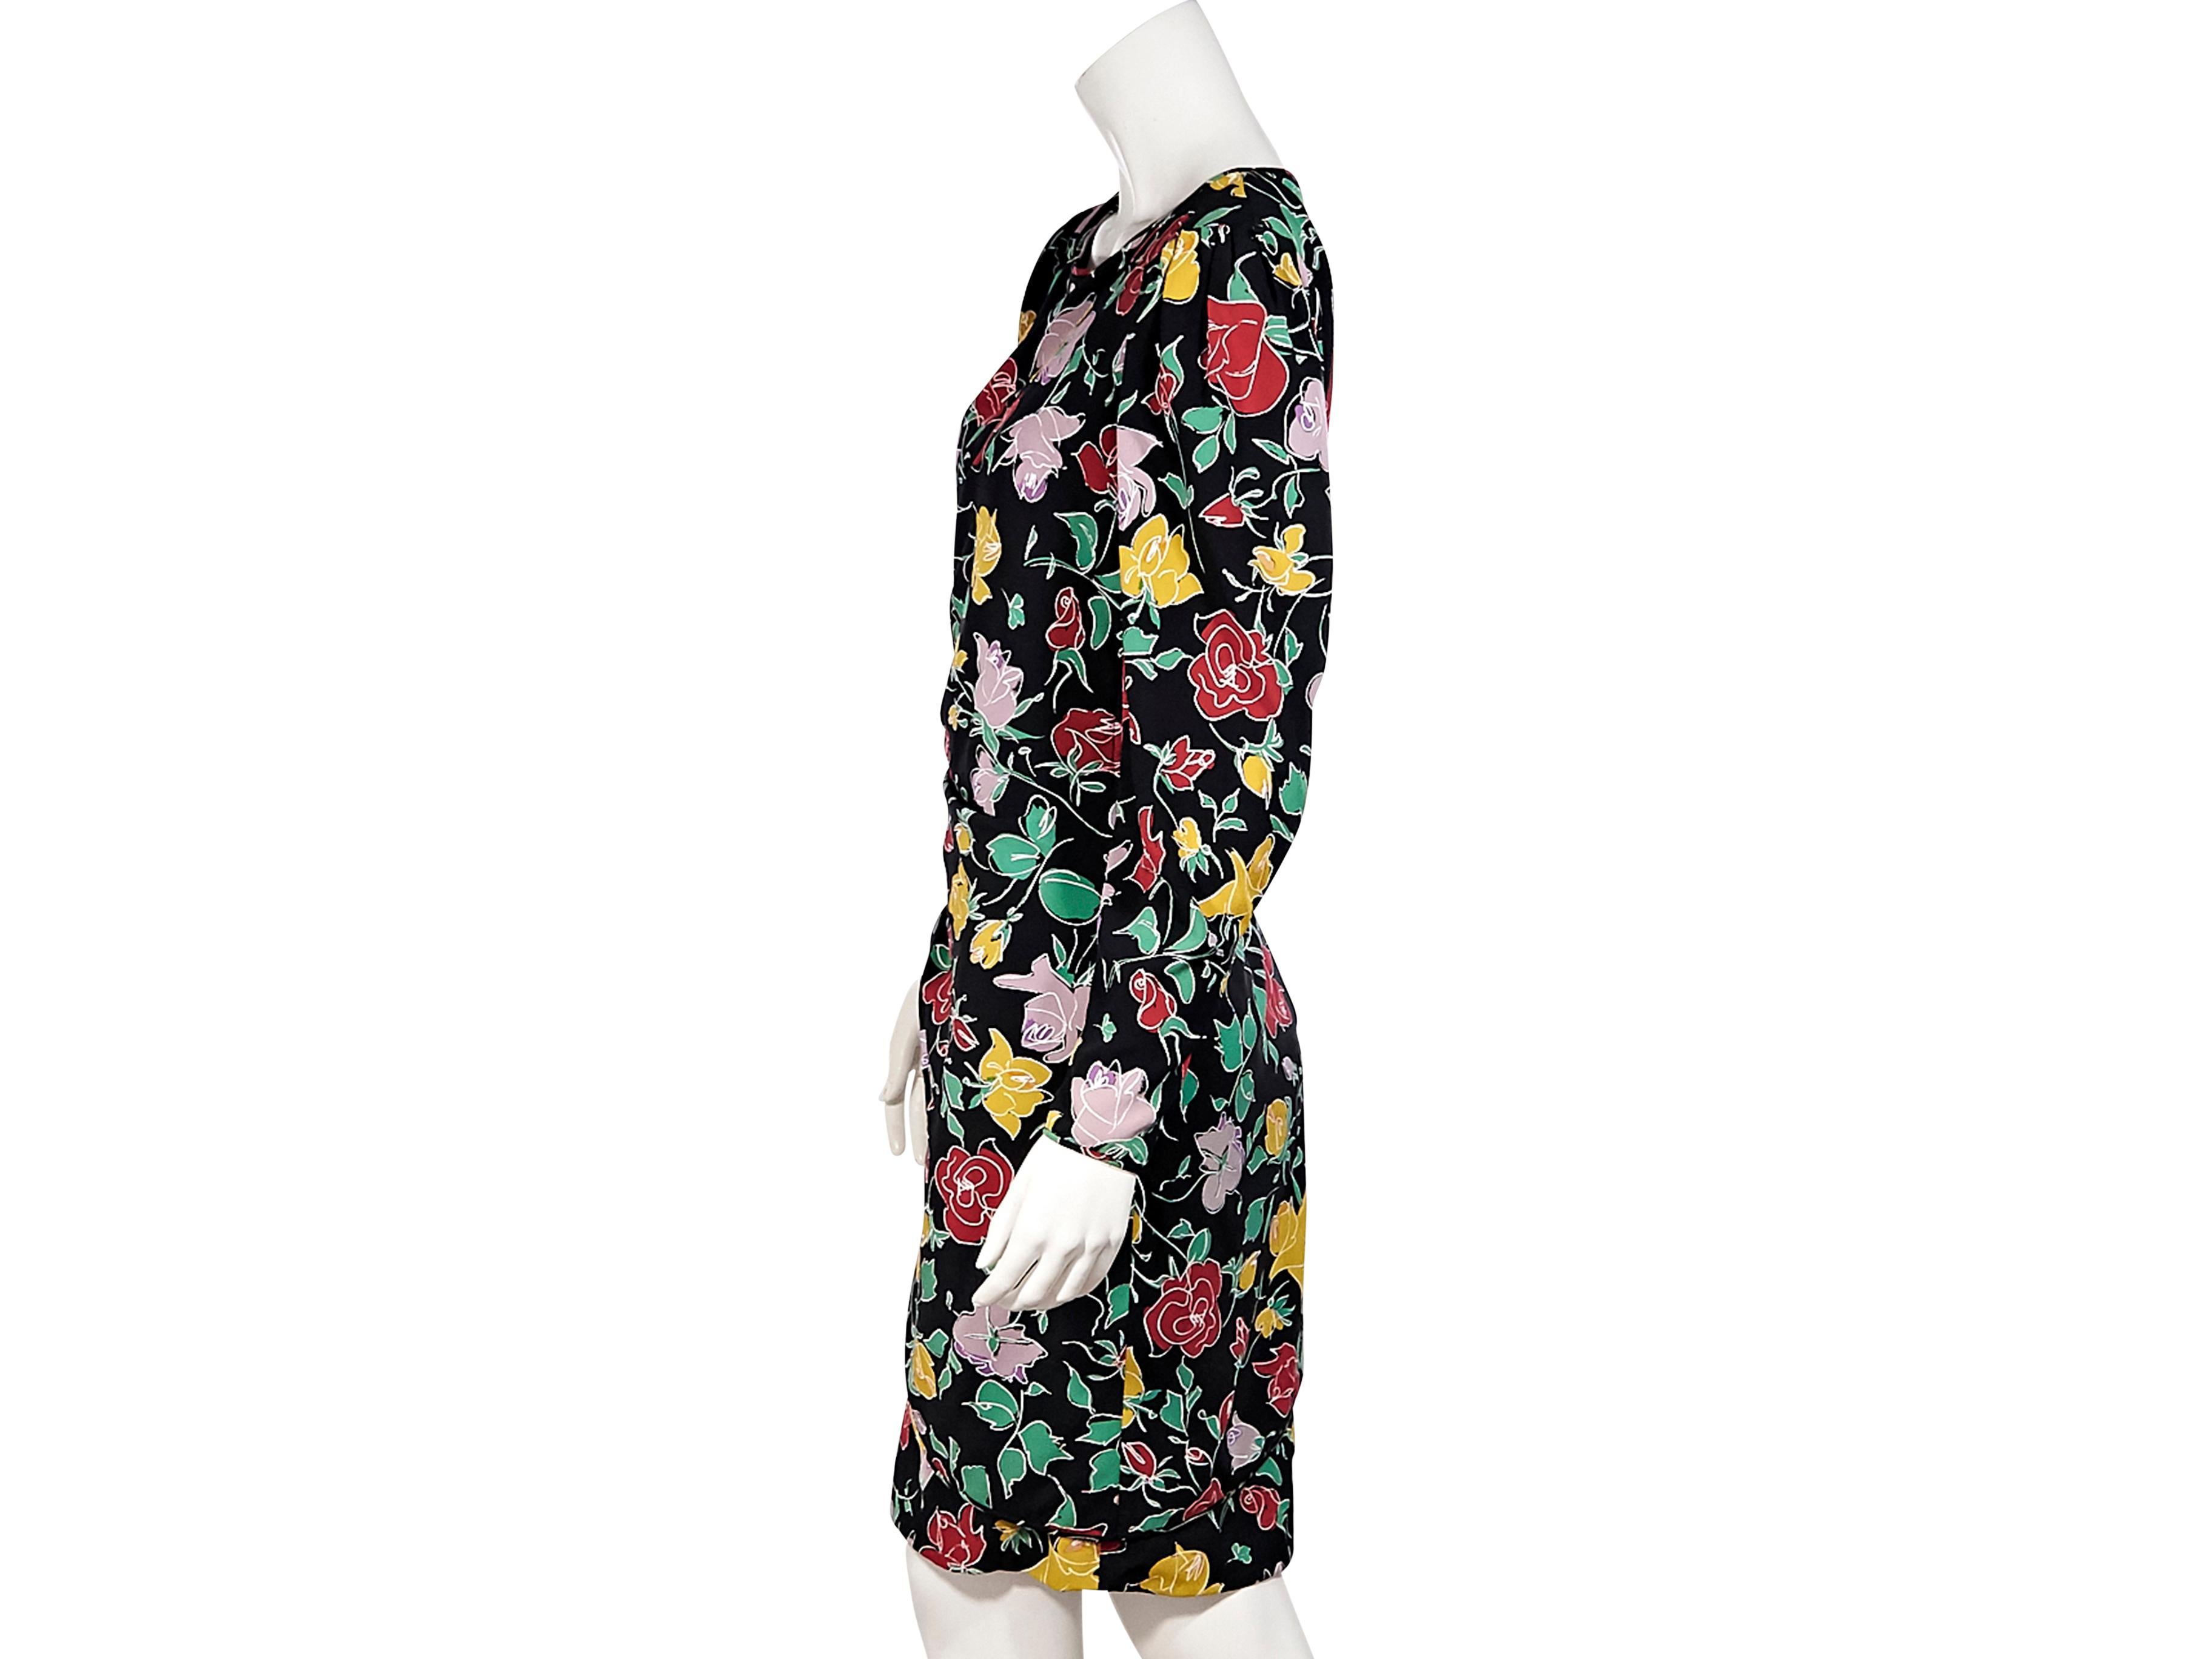 Product details:  Black and multicolor floral-printed silk knee-length dress by Ungaro. Draped at front. Tie at side. Scoop neck. Puff shoulders. Long sleeves.  Concealed back zip closure. Pair yours with patent leather Mary Jane pumps. 34